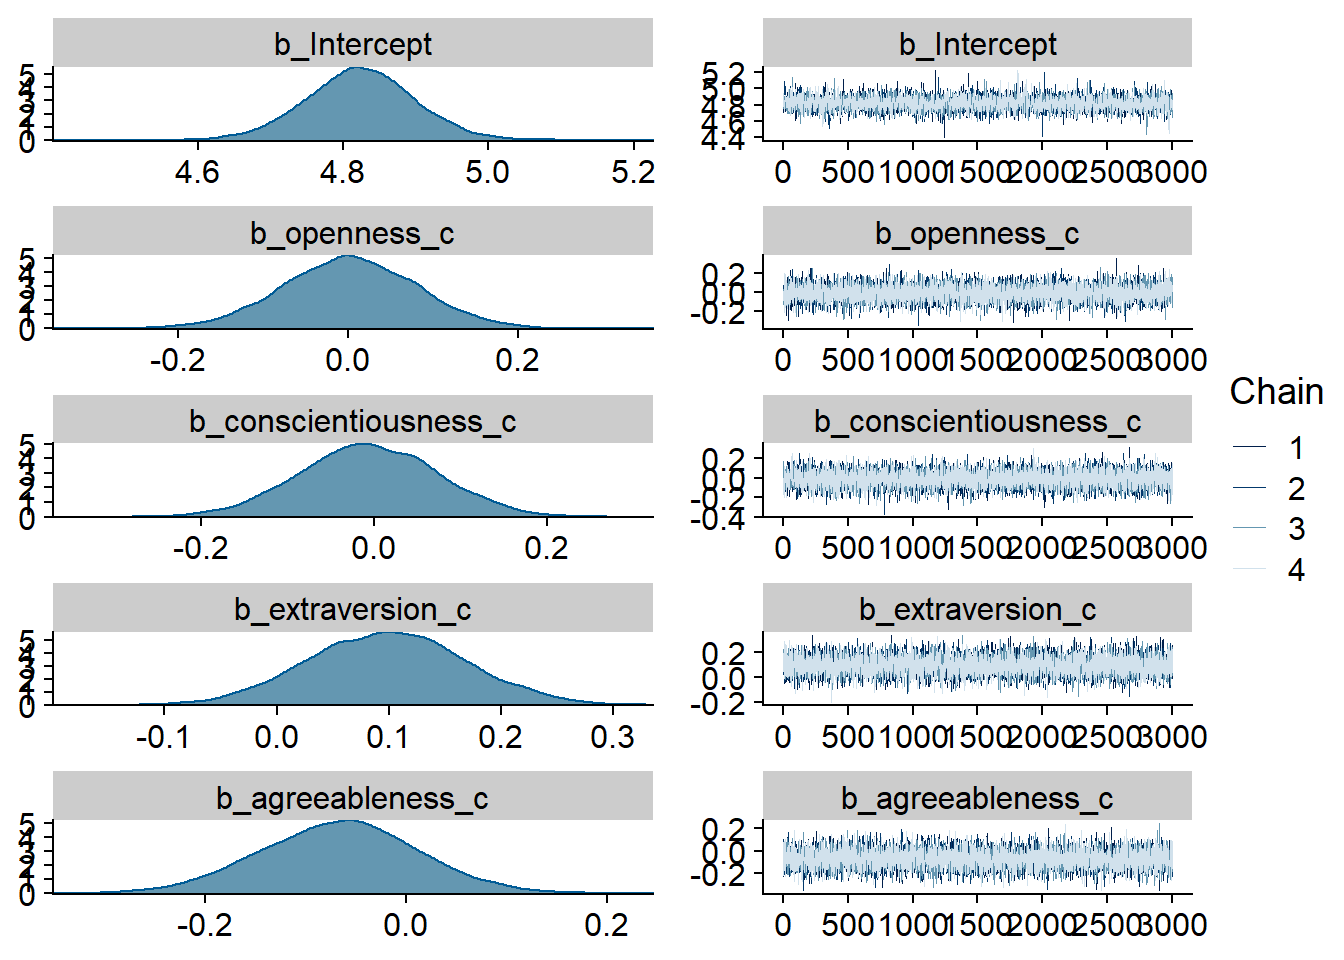 Traceplots and posterior distributions for Model 1